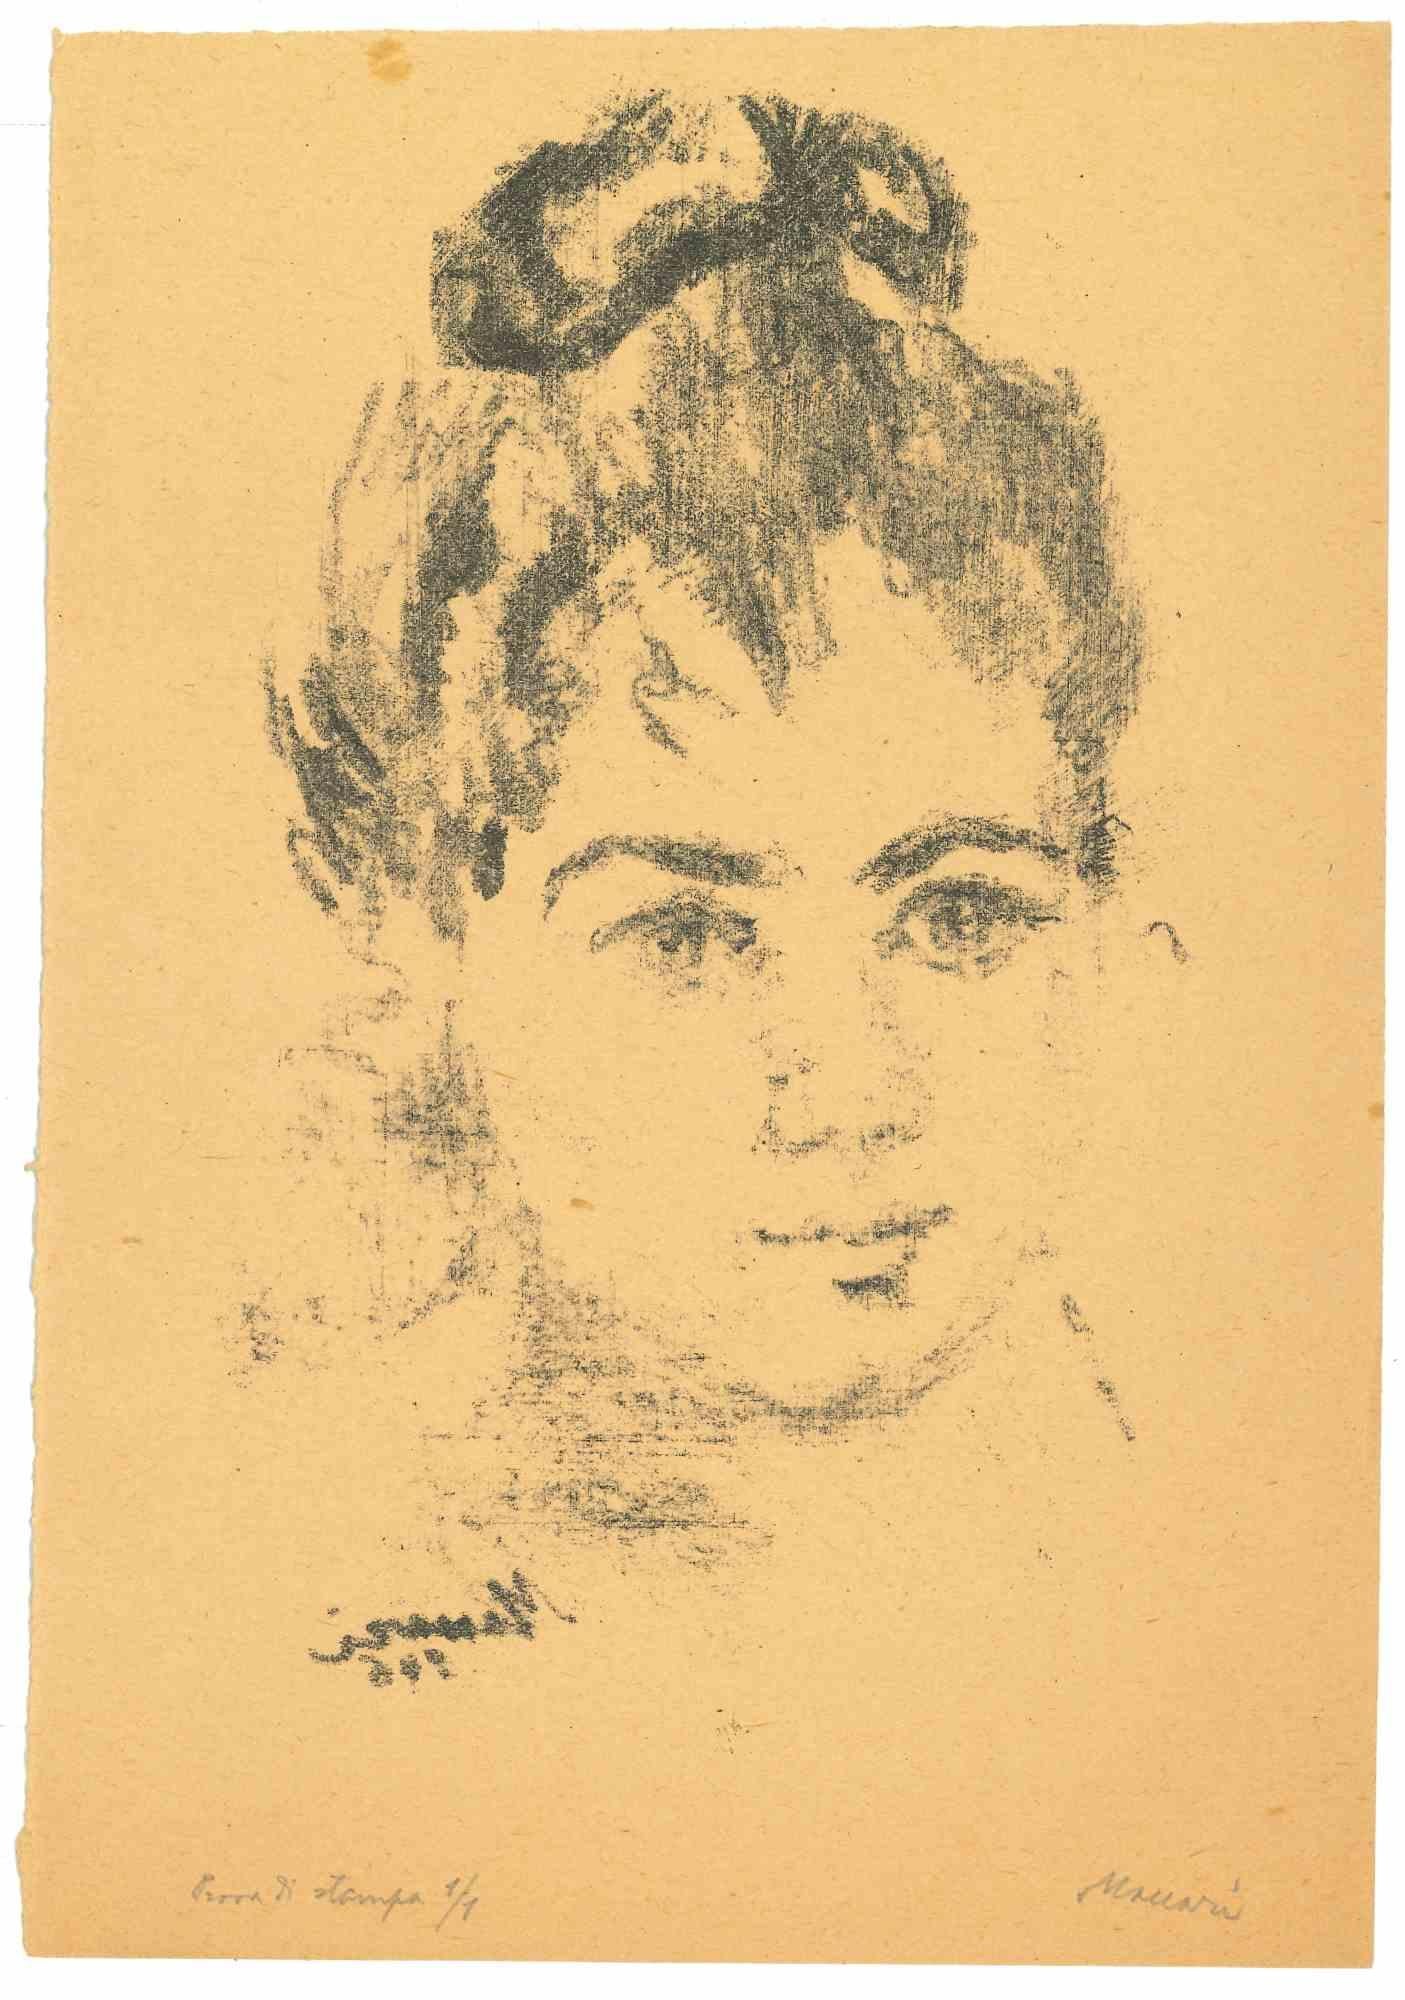 Portrait is an original Lithograph realized by Mino Maccari in 1946.

Good condition on a cream-colored paper.

Hand-signed by the artist with pencil.

Mino Maccari (1898-1989) was an Italian writer, painter, engraver and journalist, winner the